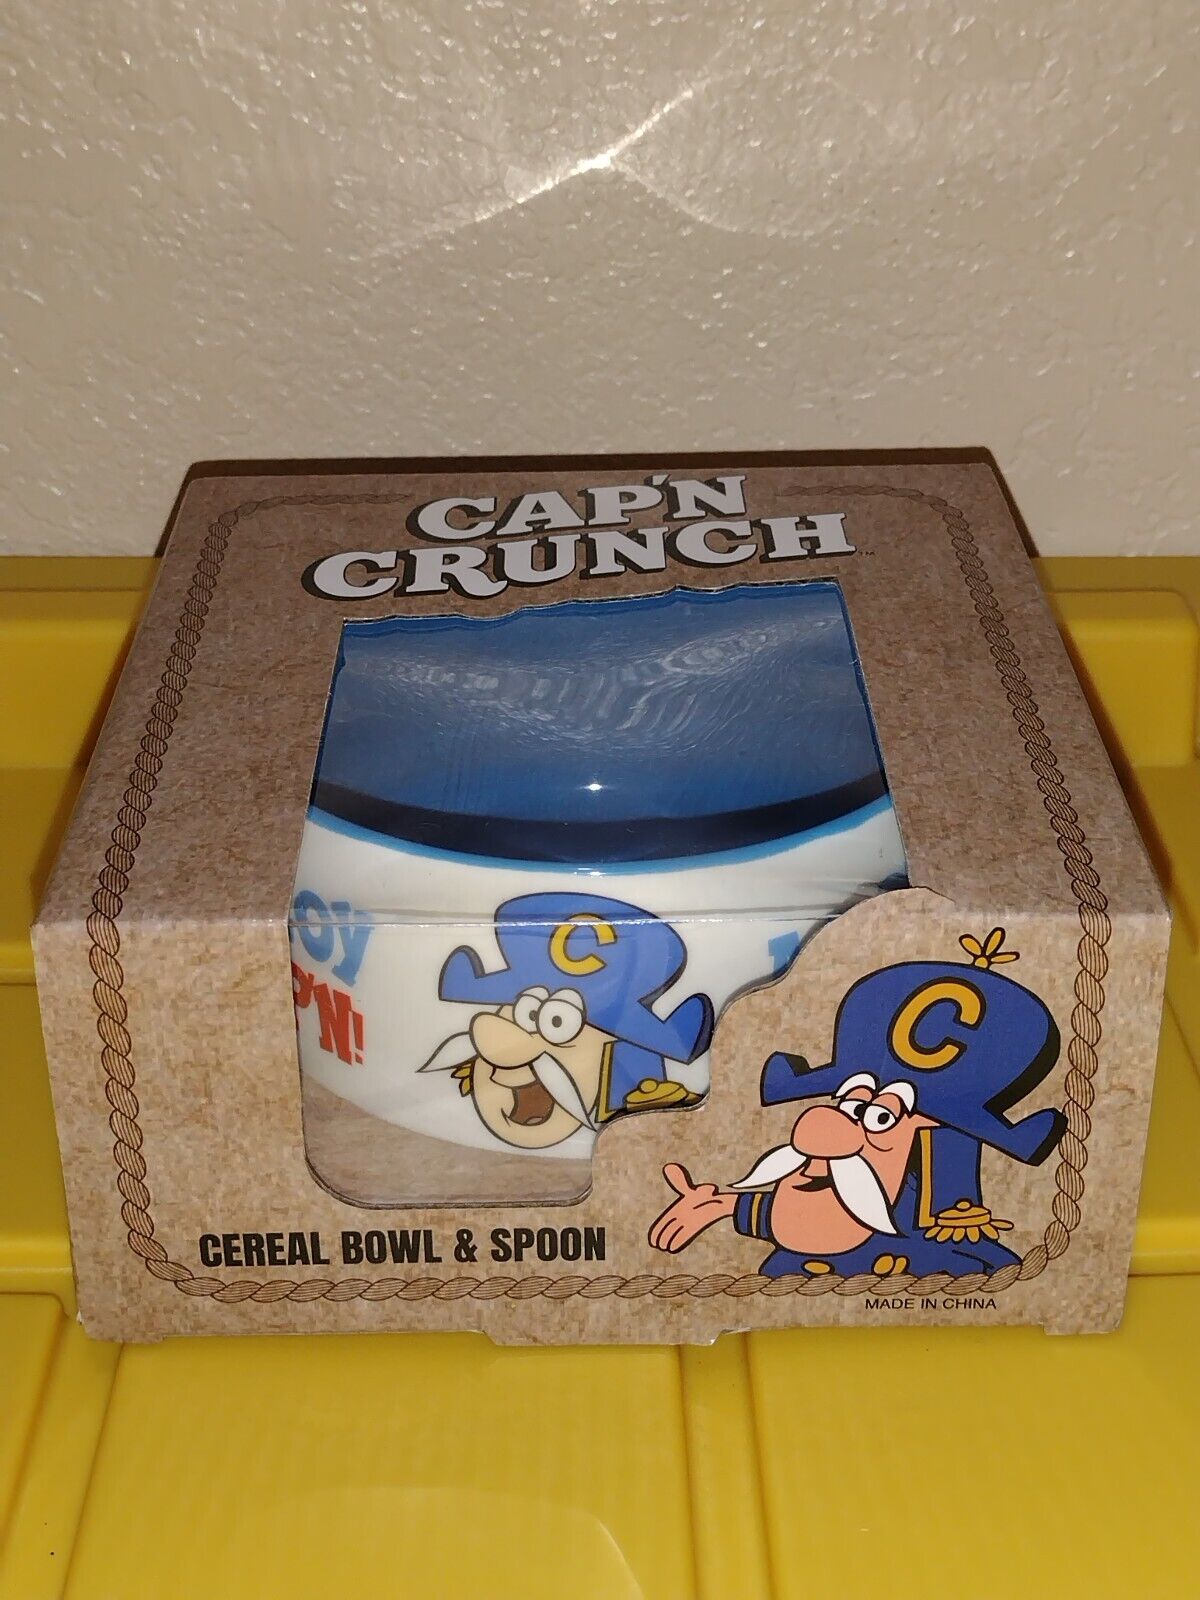 CAP'N CRUNCH CEREAL BOWL & SPOON CAPTAIN CRUNCH CERAMIC CEREAL BOWL NEW